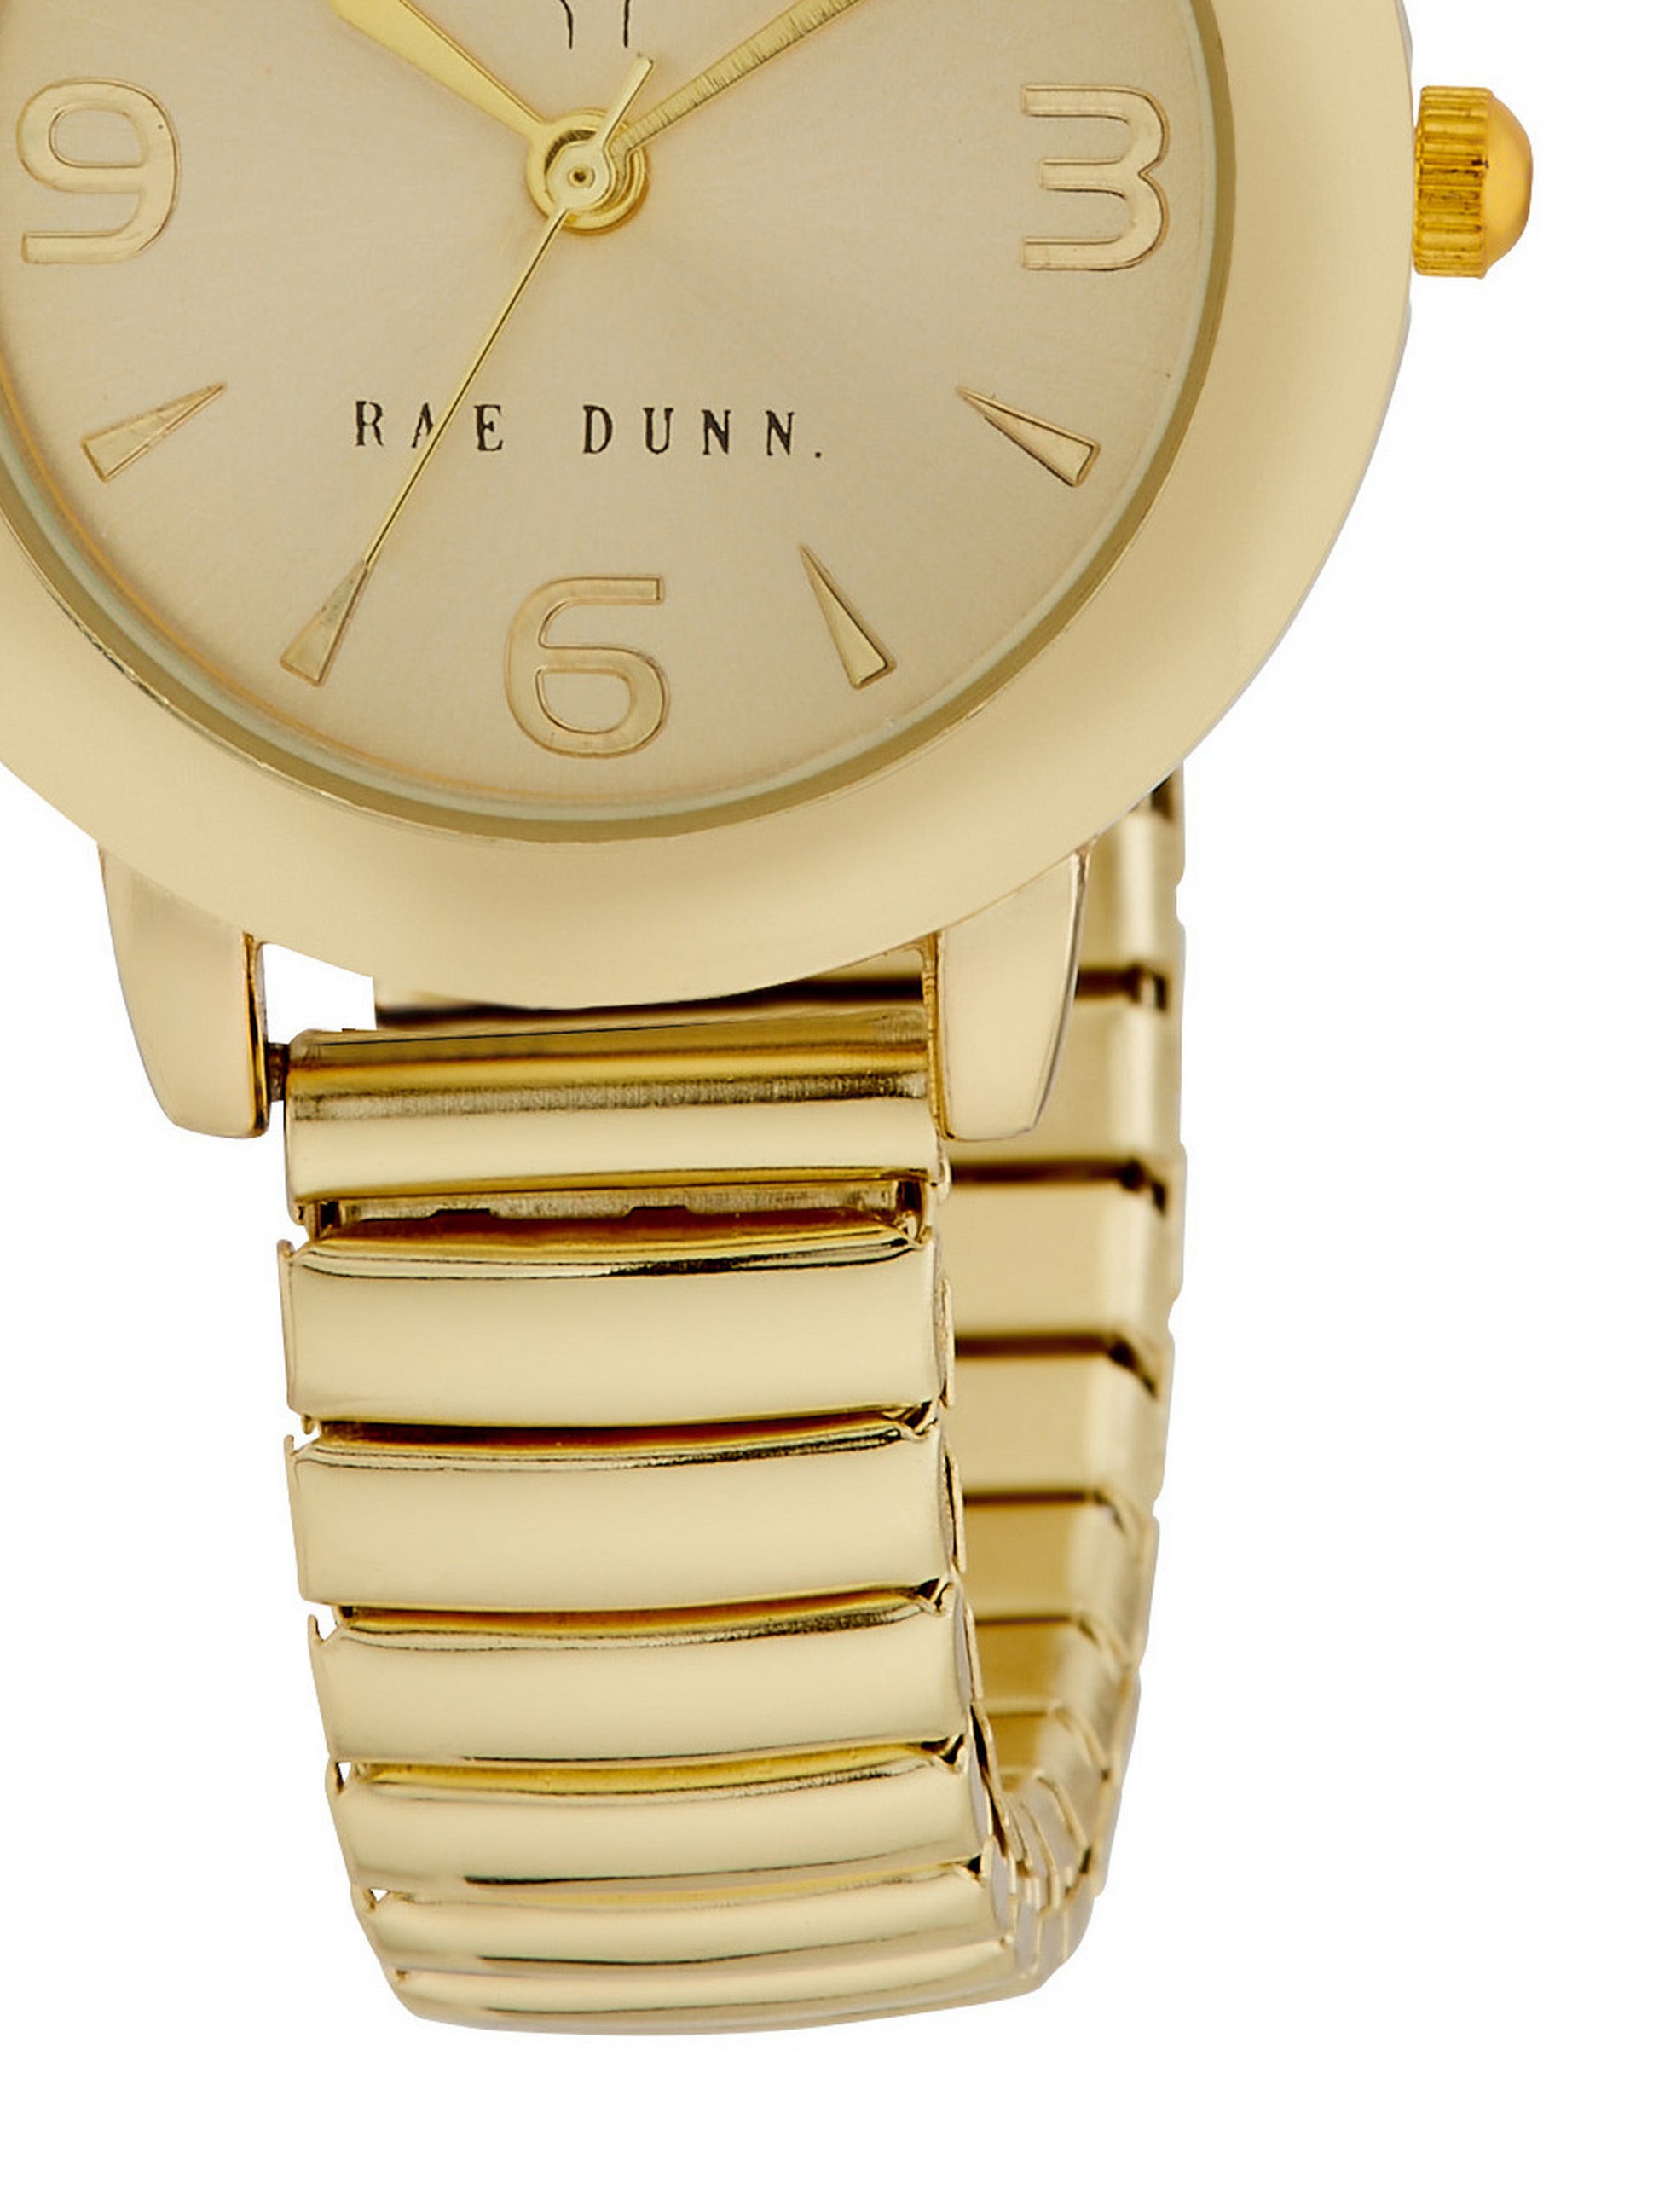 HEATHER Round Face Expandable Bracelet Watch in Gold, 30mm - Rae Dunn Wear - Watch